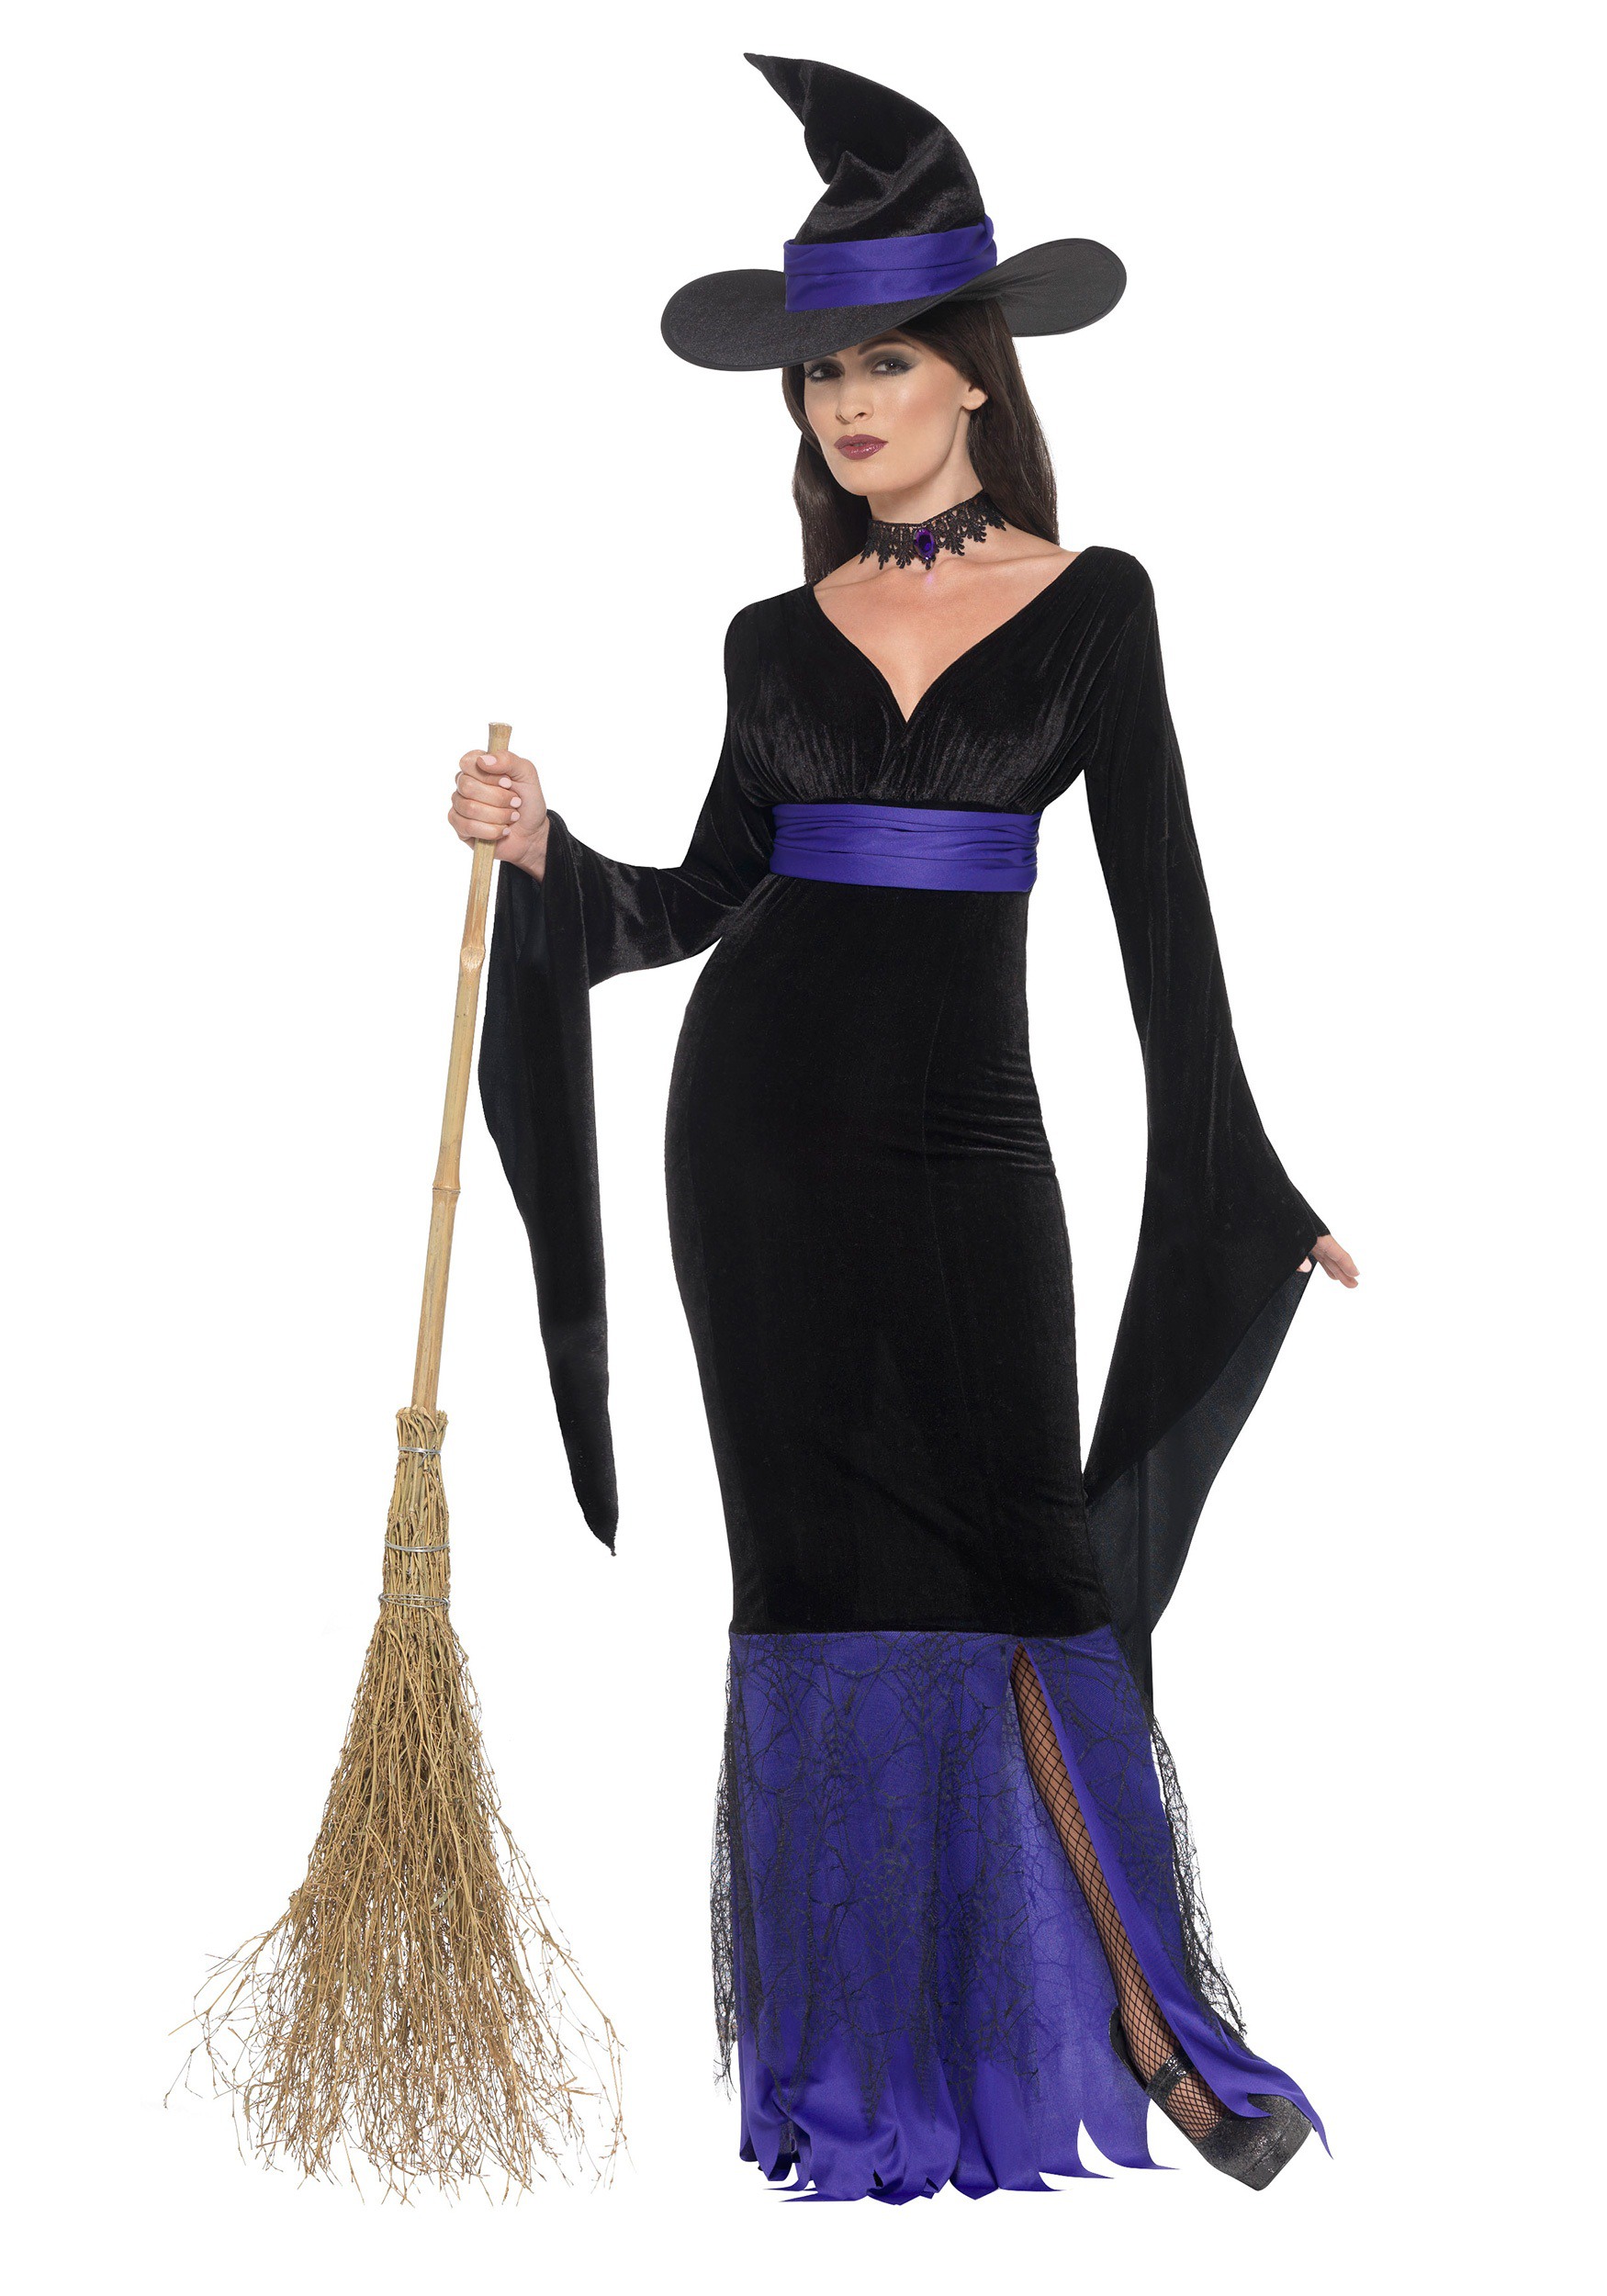 Toddler Storybook Witch Costume - Cute Witch Costumes for Kids